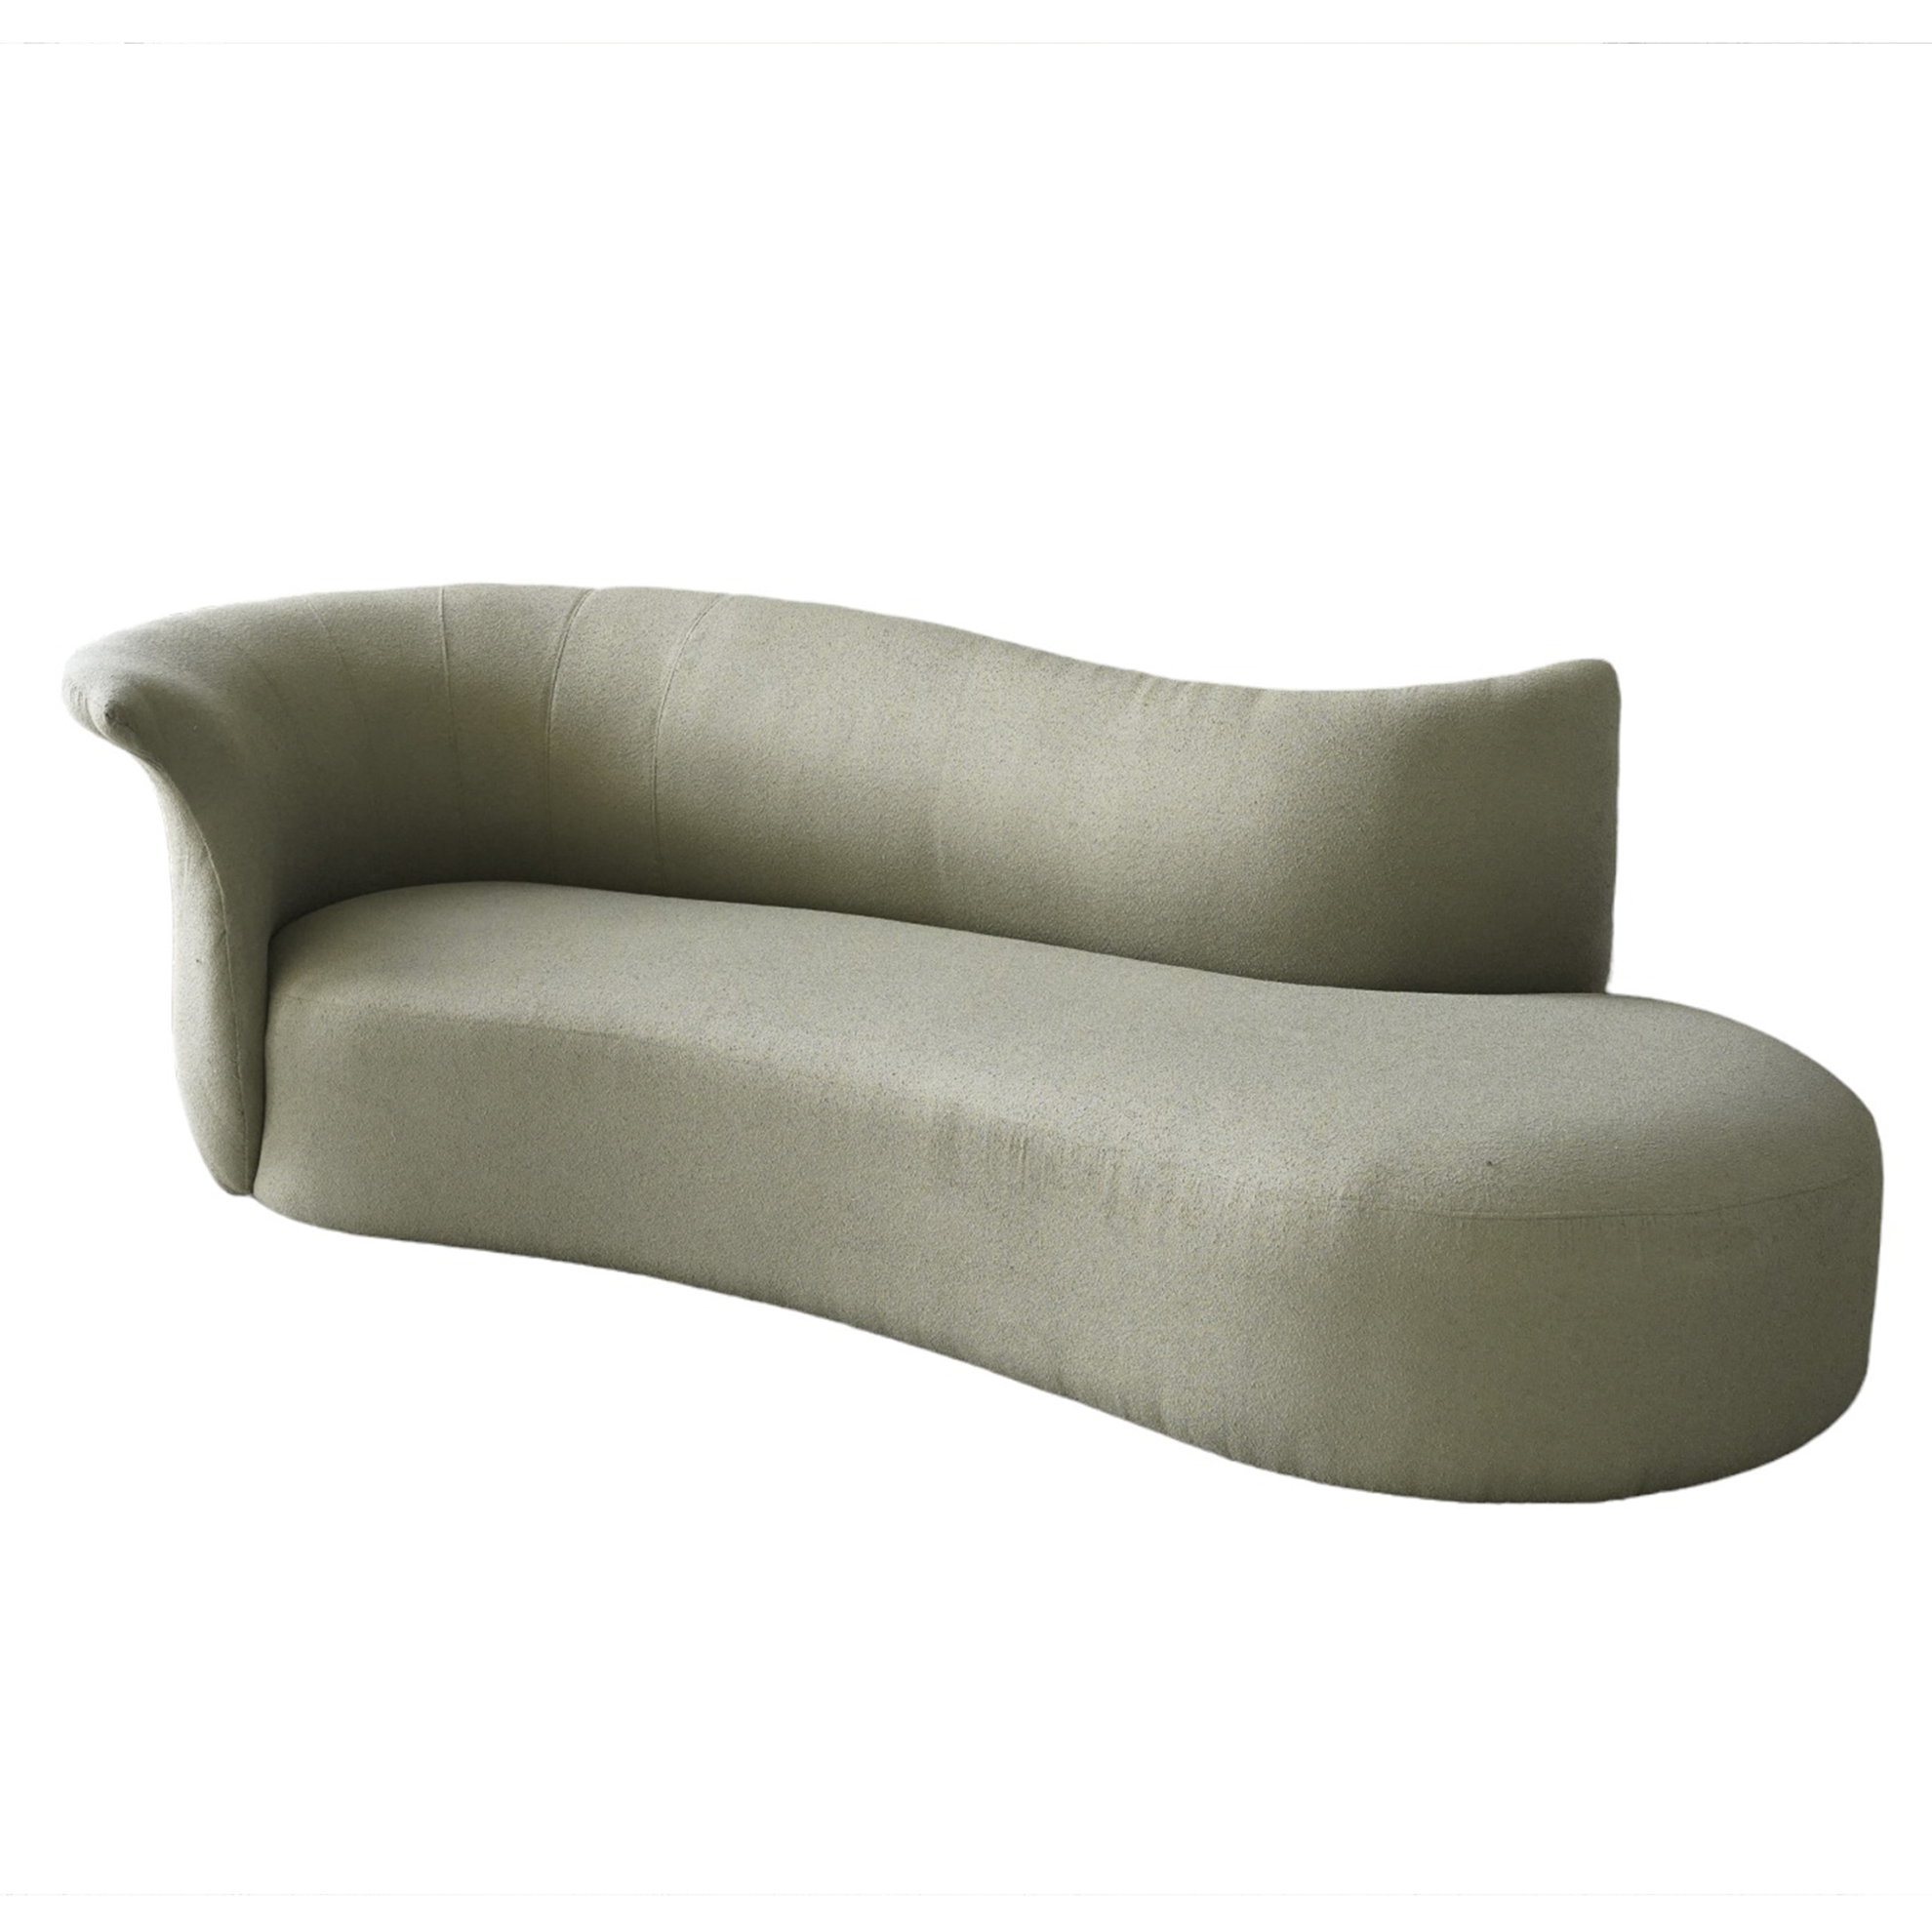 Curved 4 seater sofa